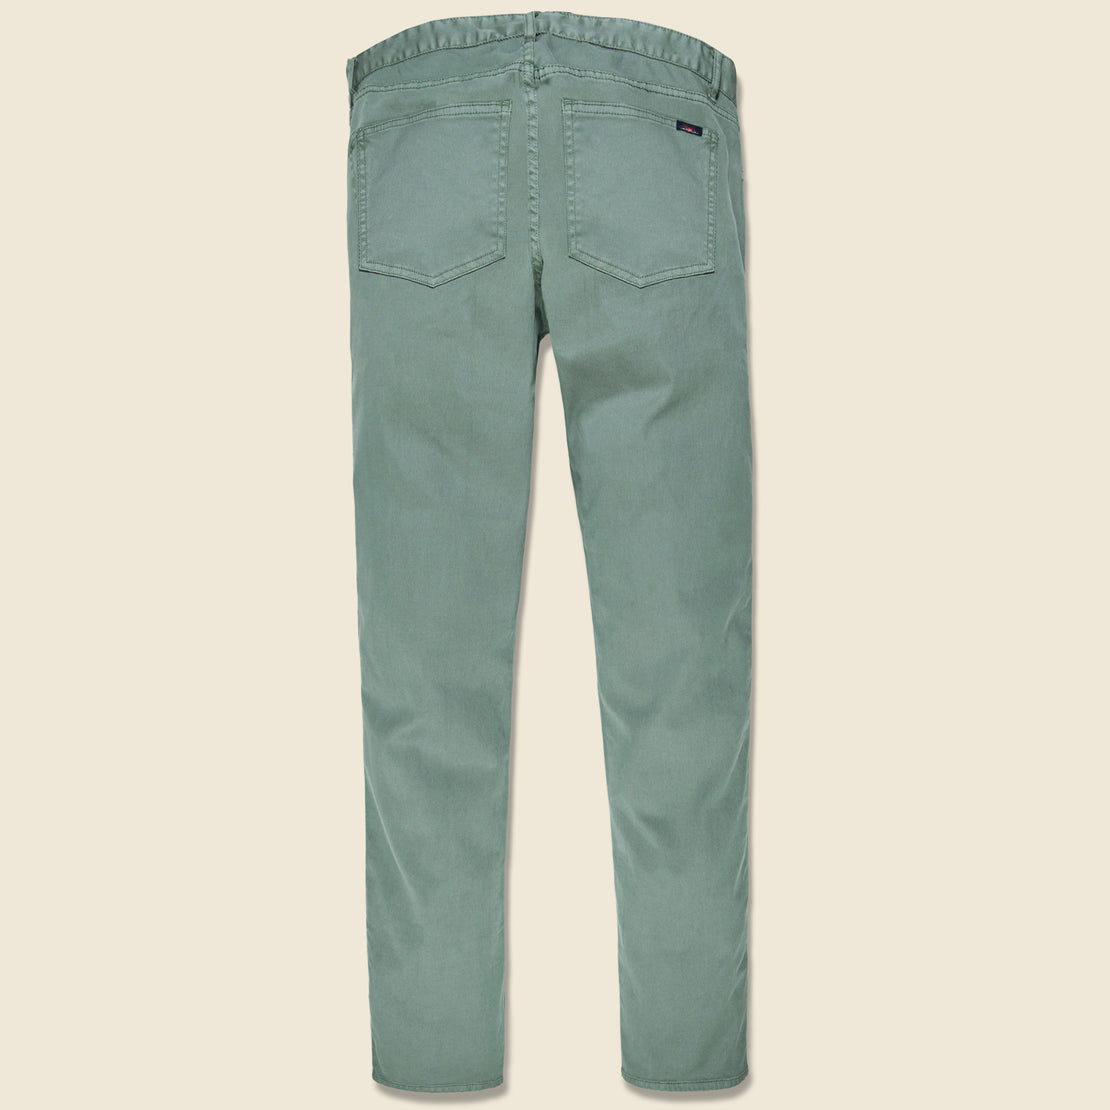 Comfort Twill Jean - Surplus Green - Faherty - STAG Provisions - Pants - Twill